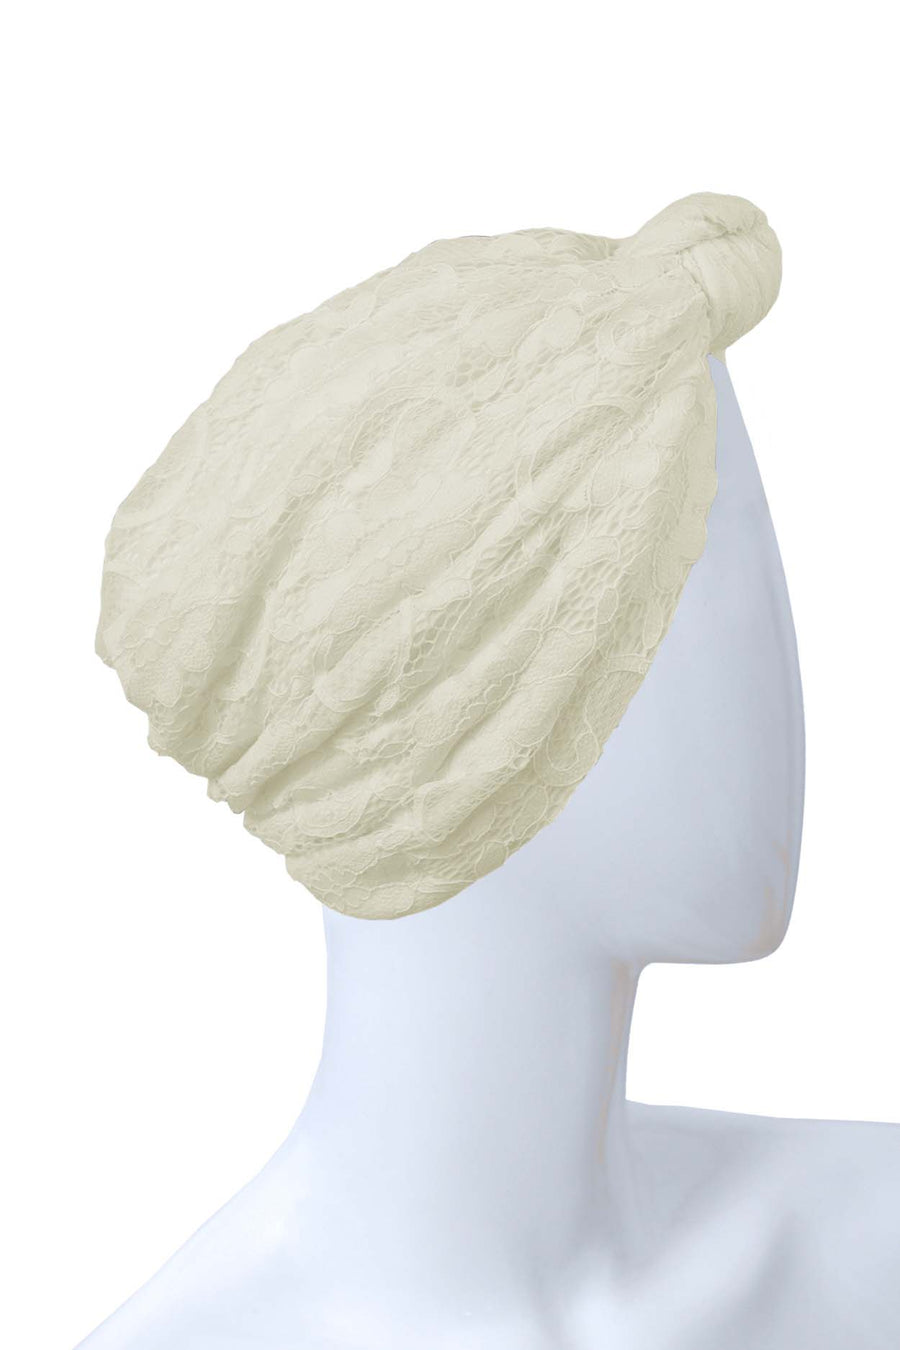 Dentelle lace cream knotted turban